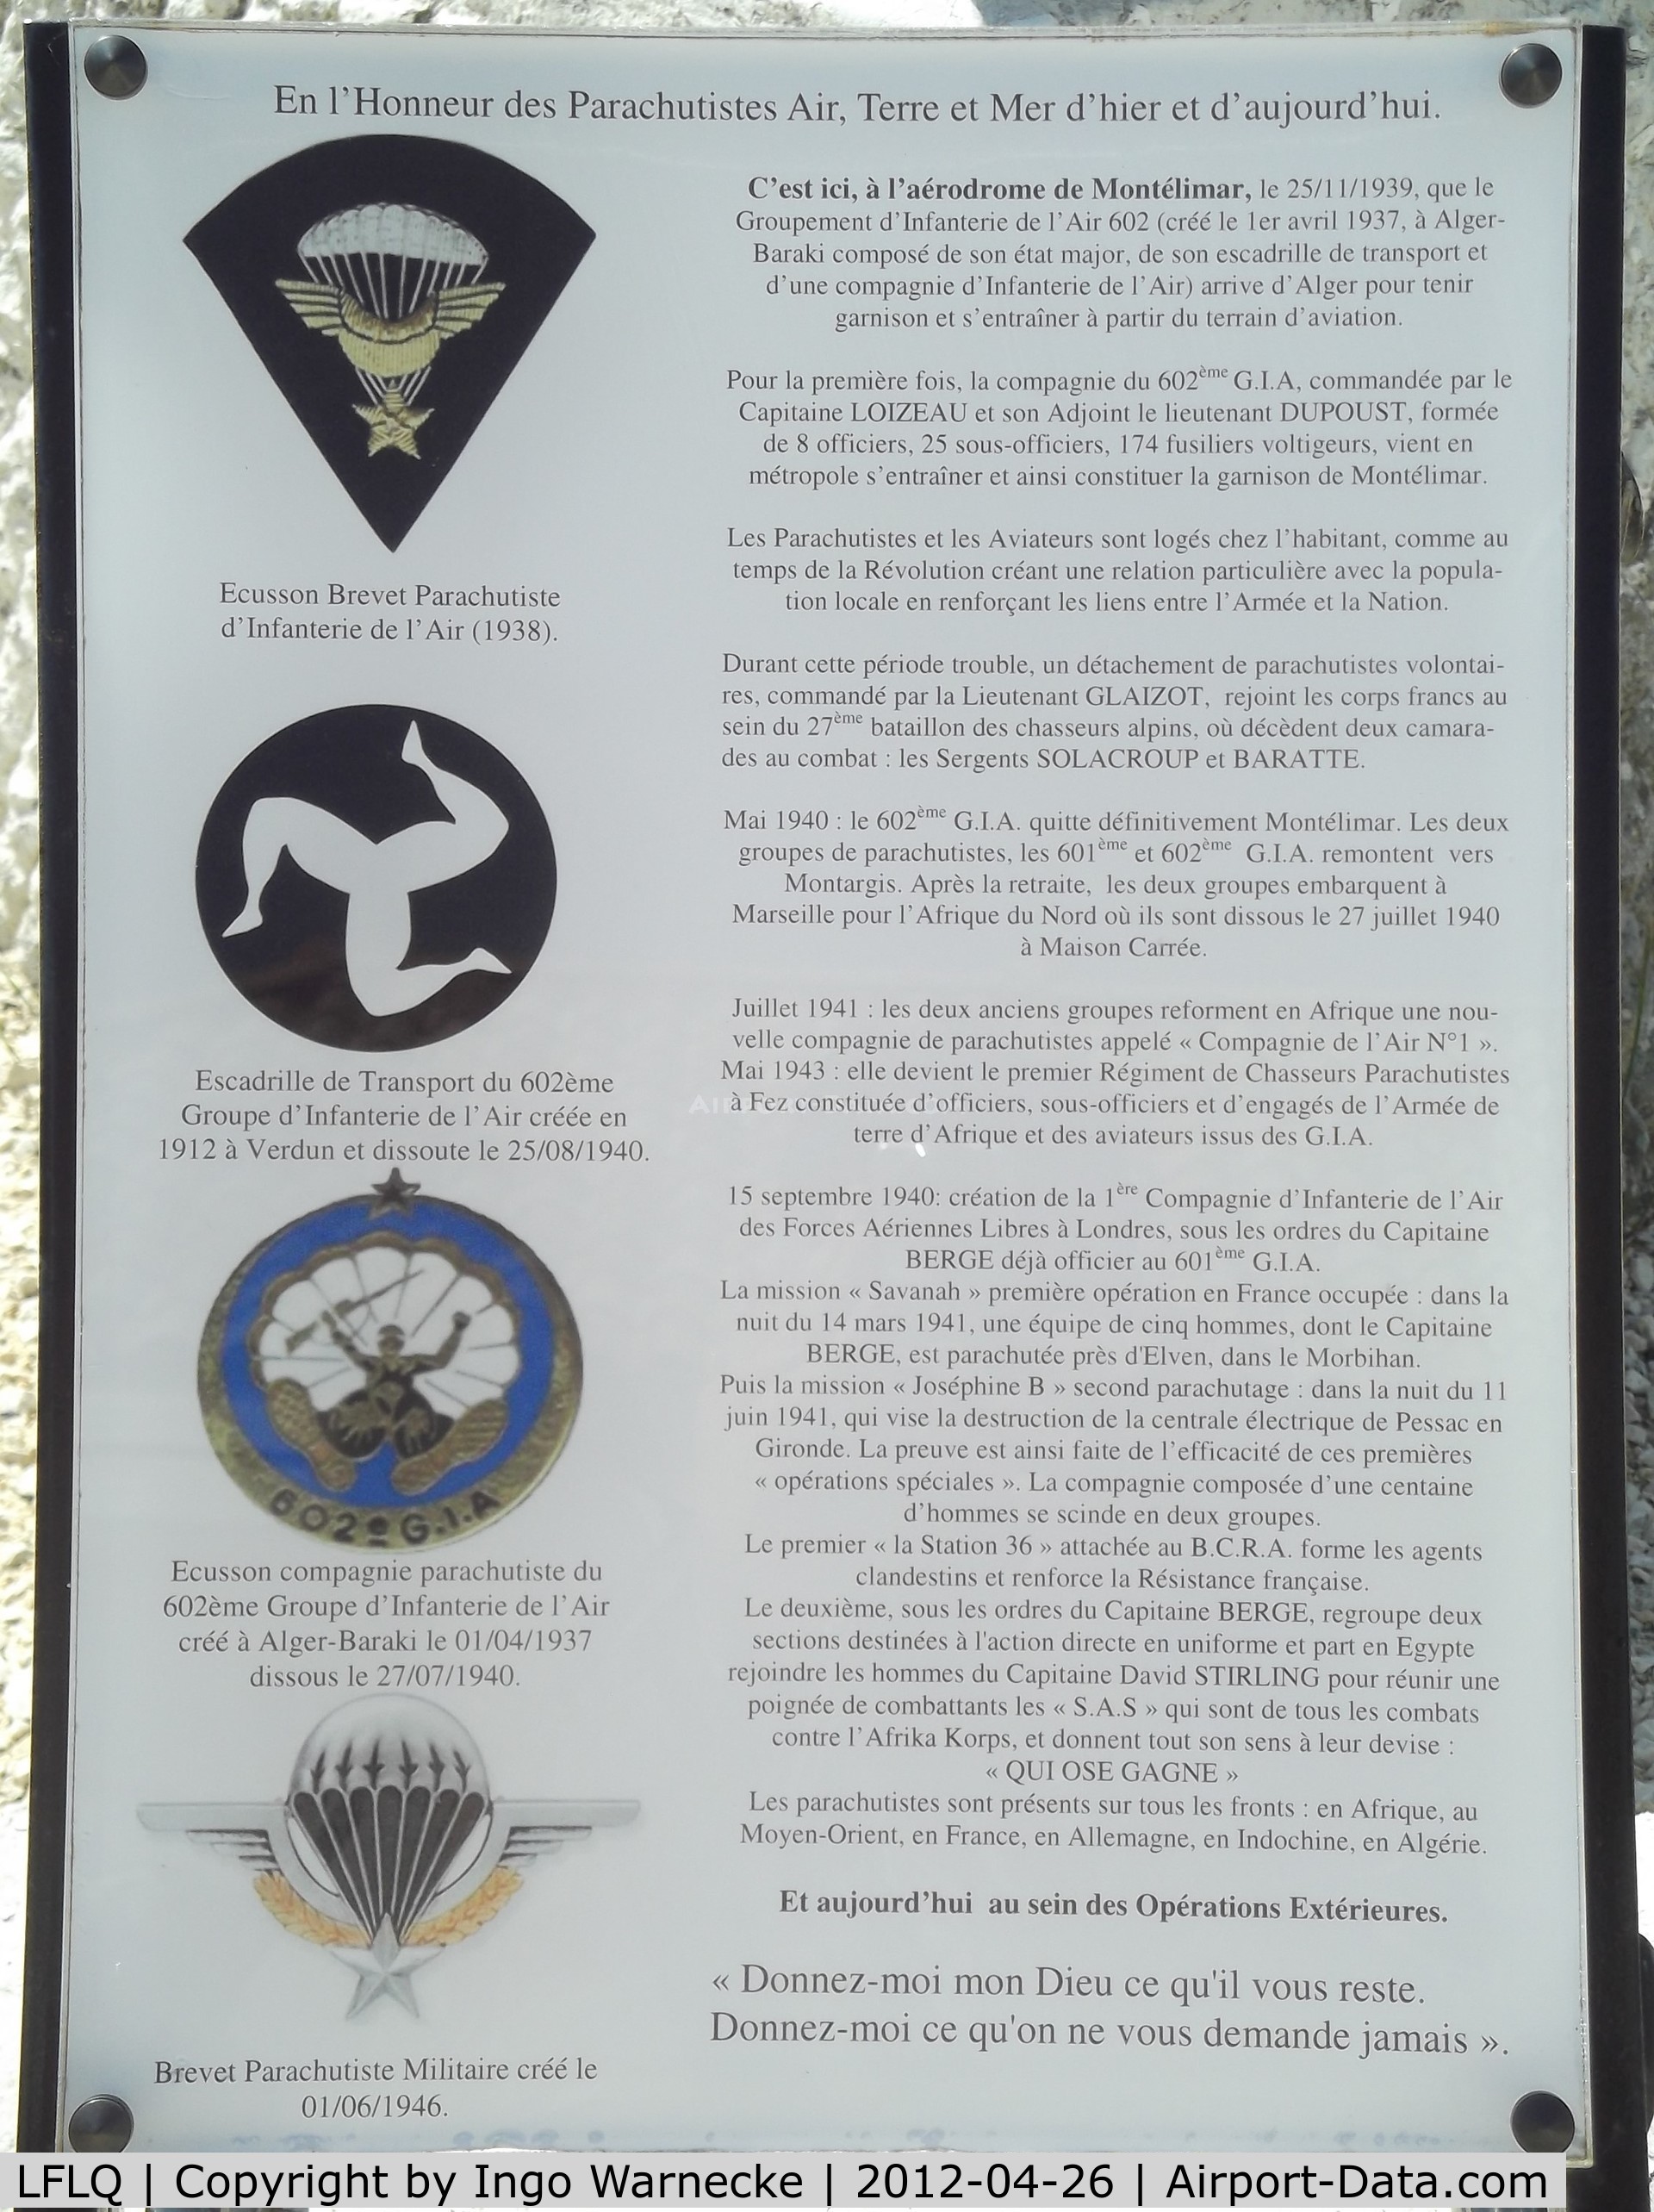 Montélimar Ancone Airport, Montélimar France (LFLQ) - plaque commenmorating the founding and history of the french paratroopers at Montelimar Ancone airfield